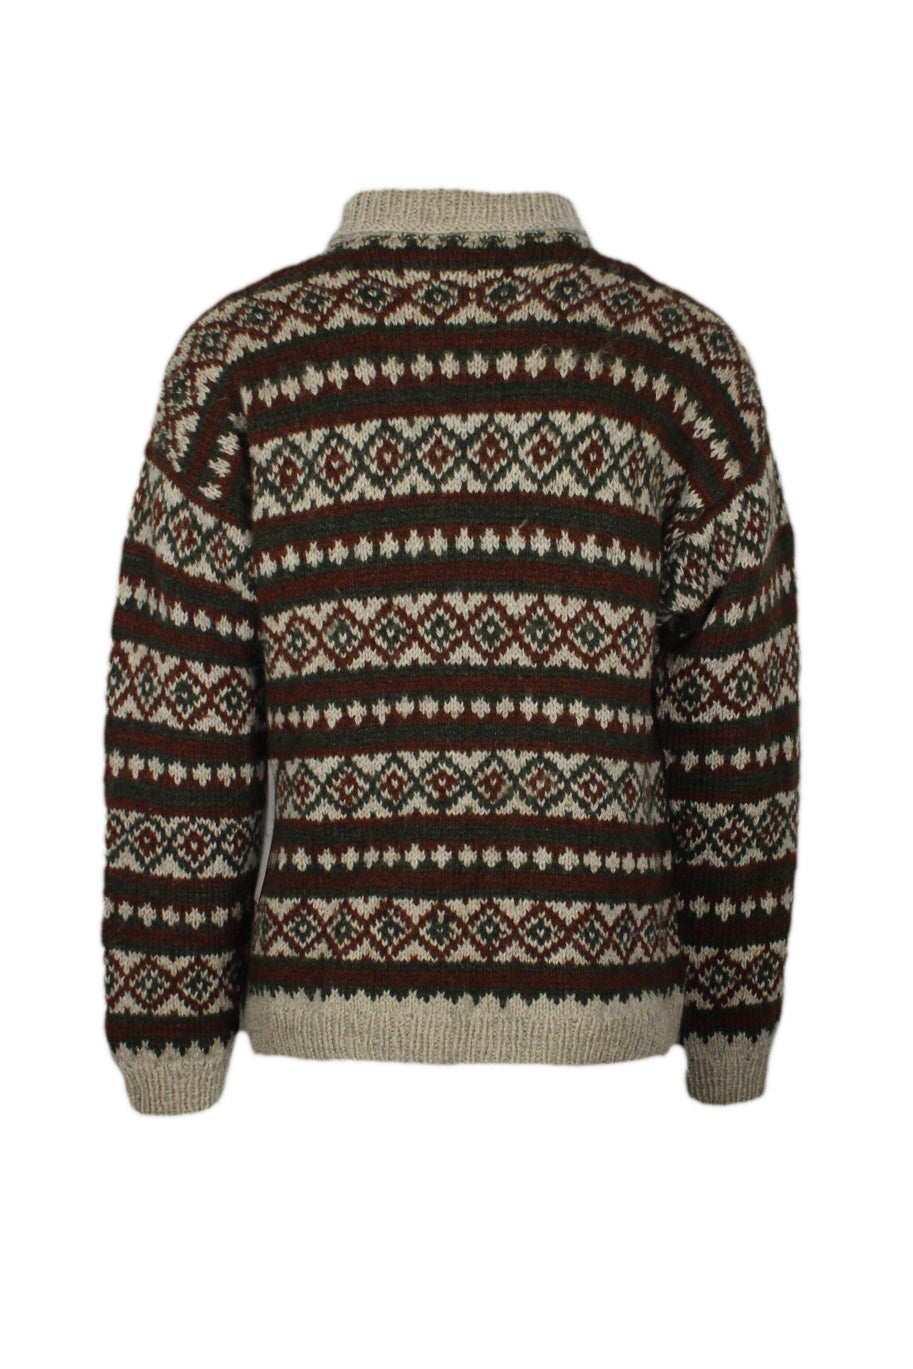 rear view with pattern throughout of sweater.